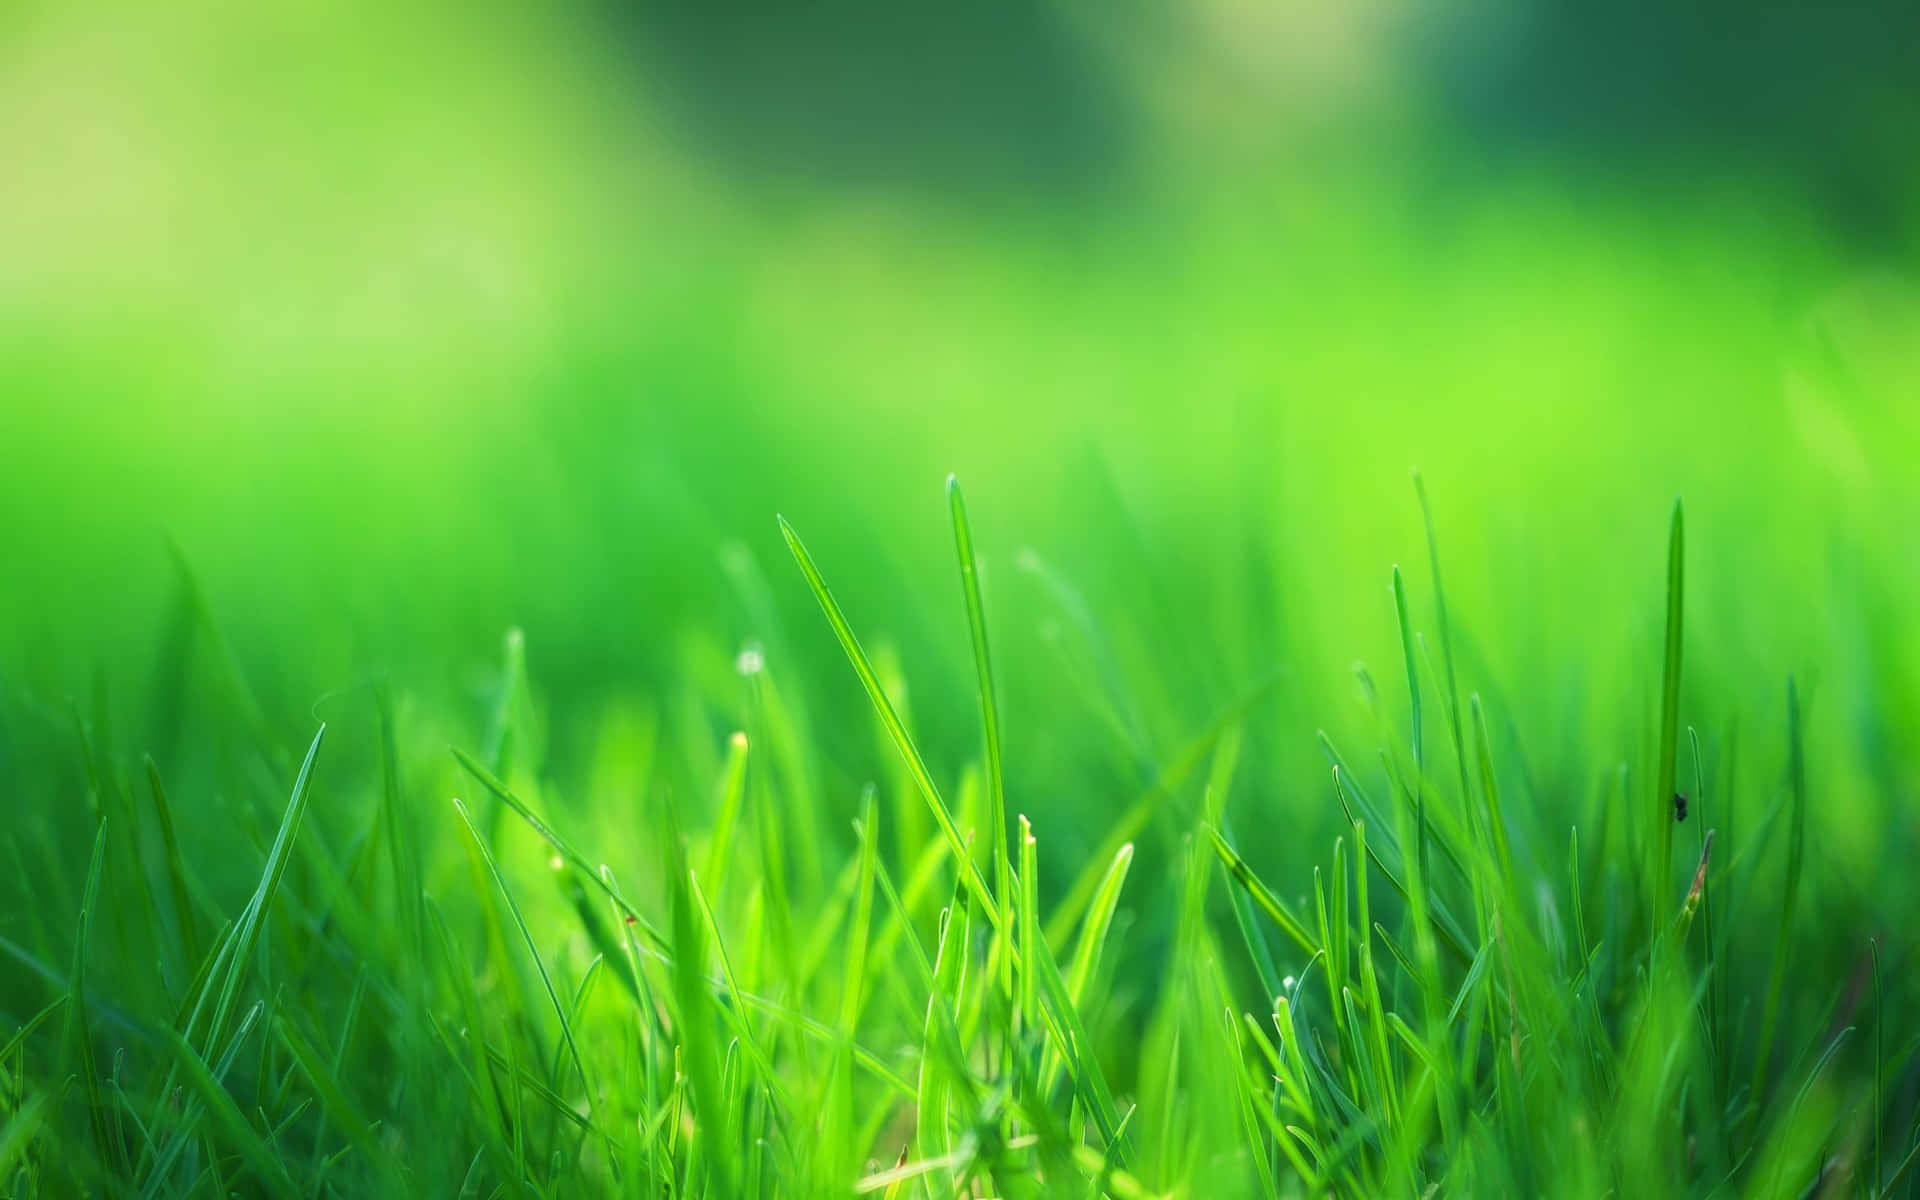 Enjoy the beauty of nature in this high-resolution grassy background.